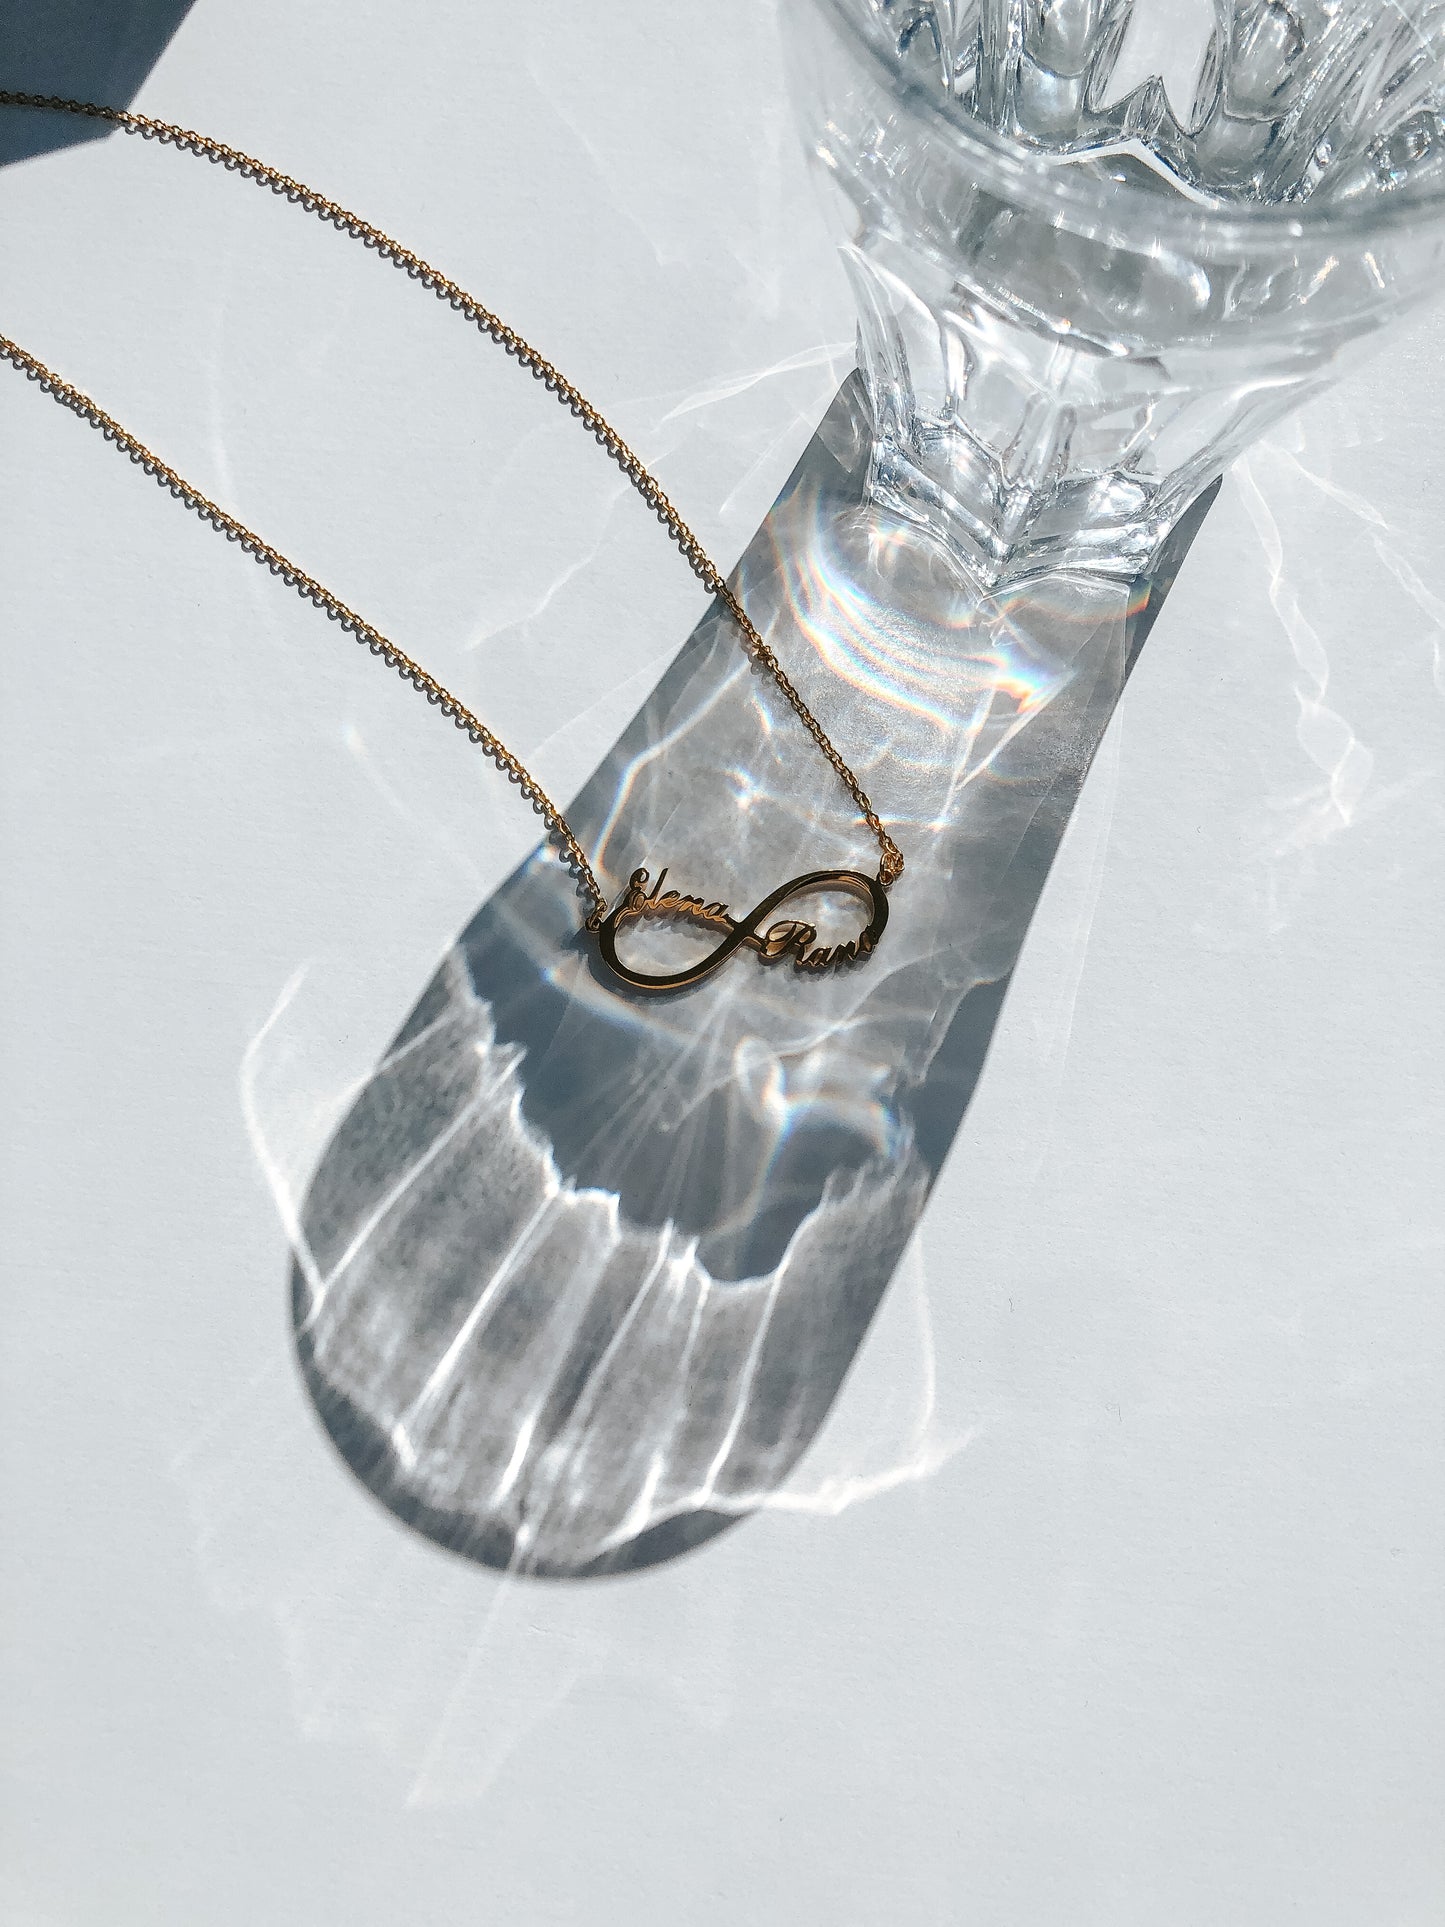 Personalised Infinity Necklace